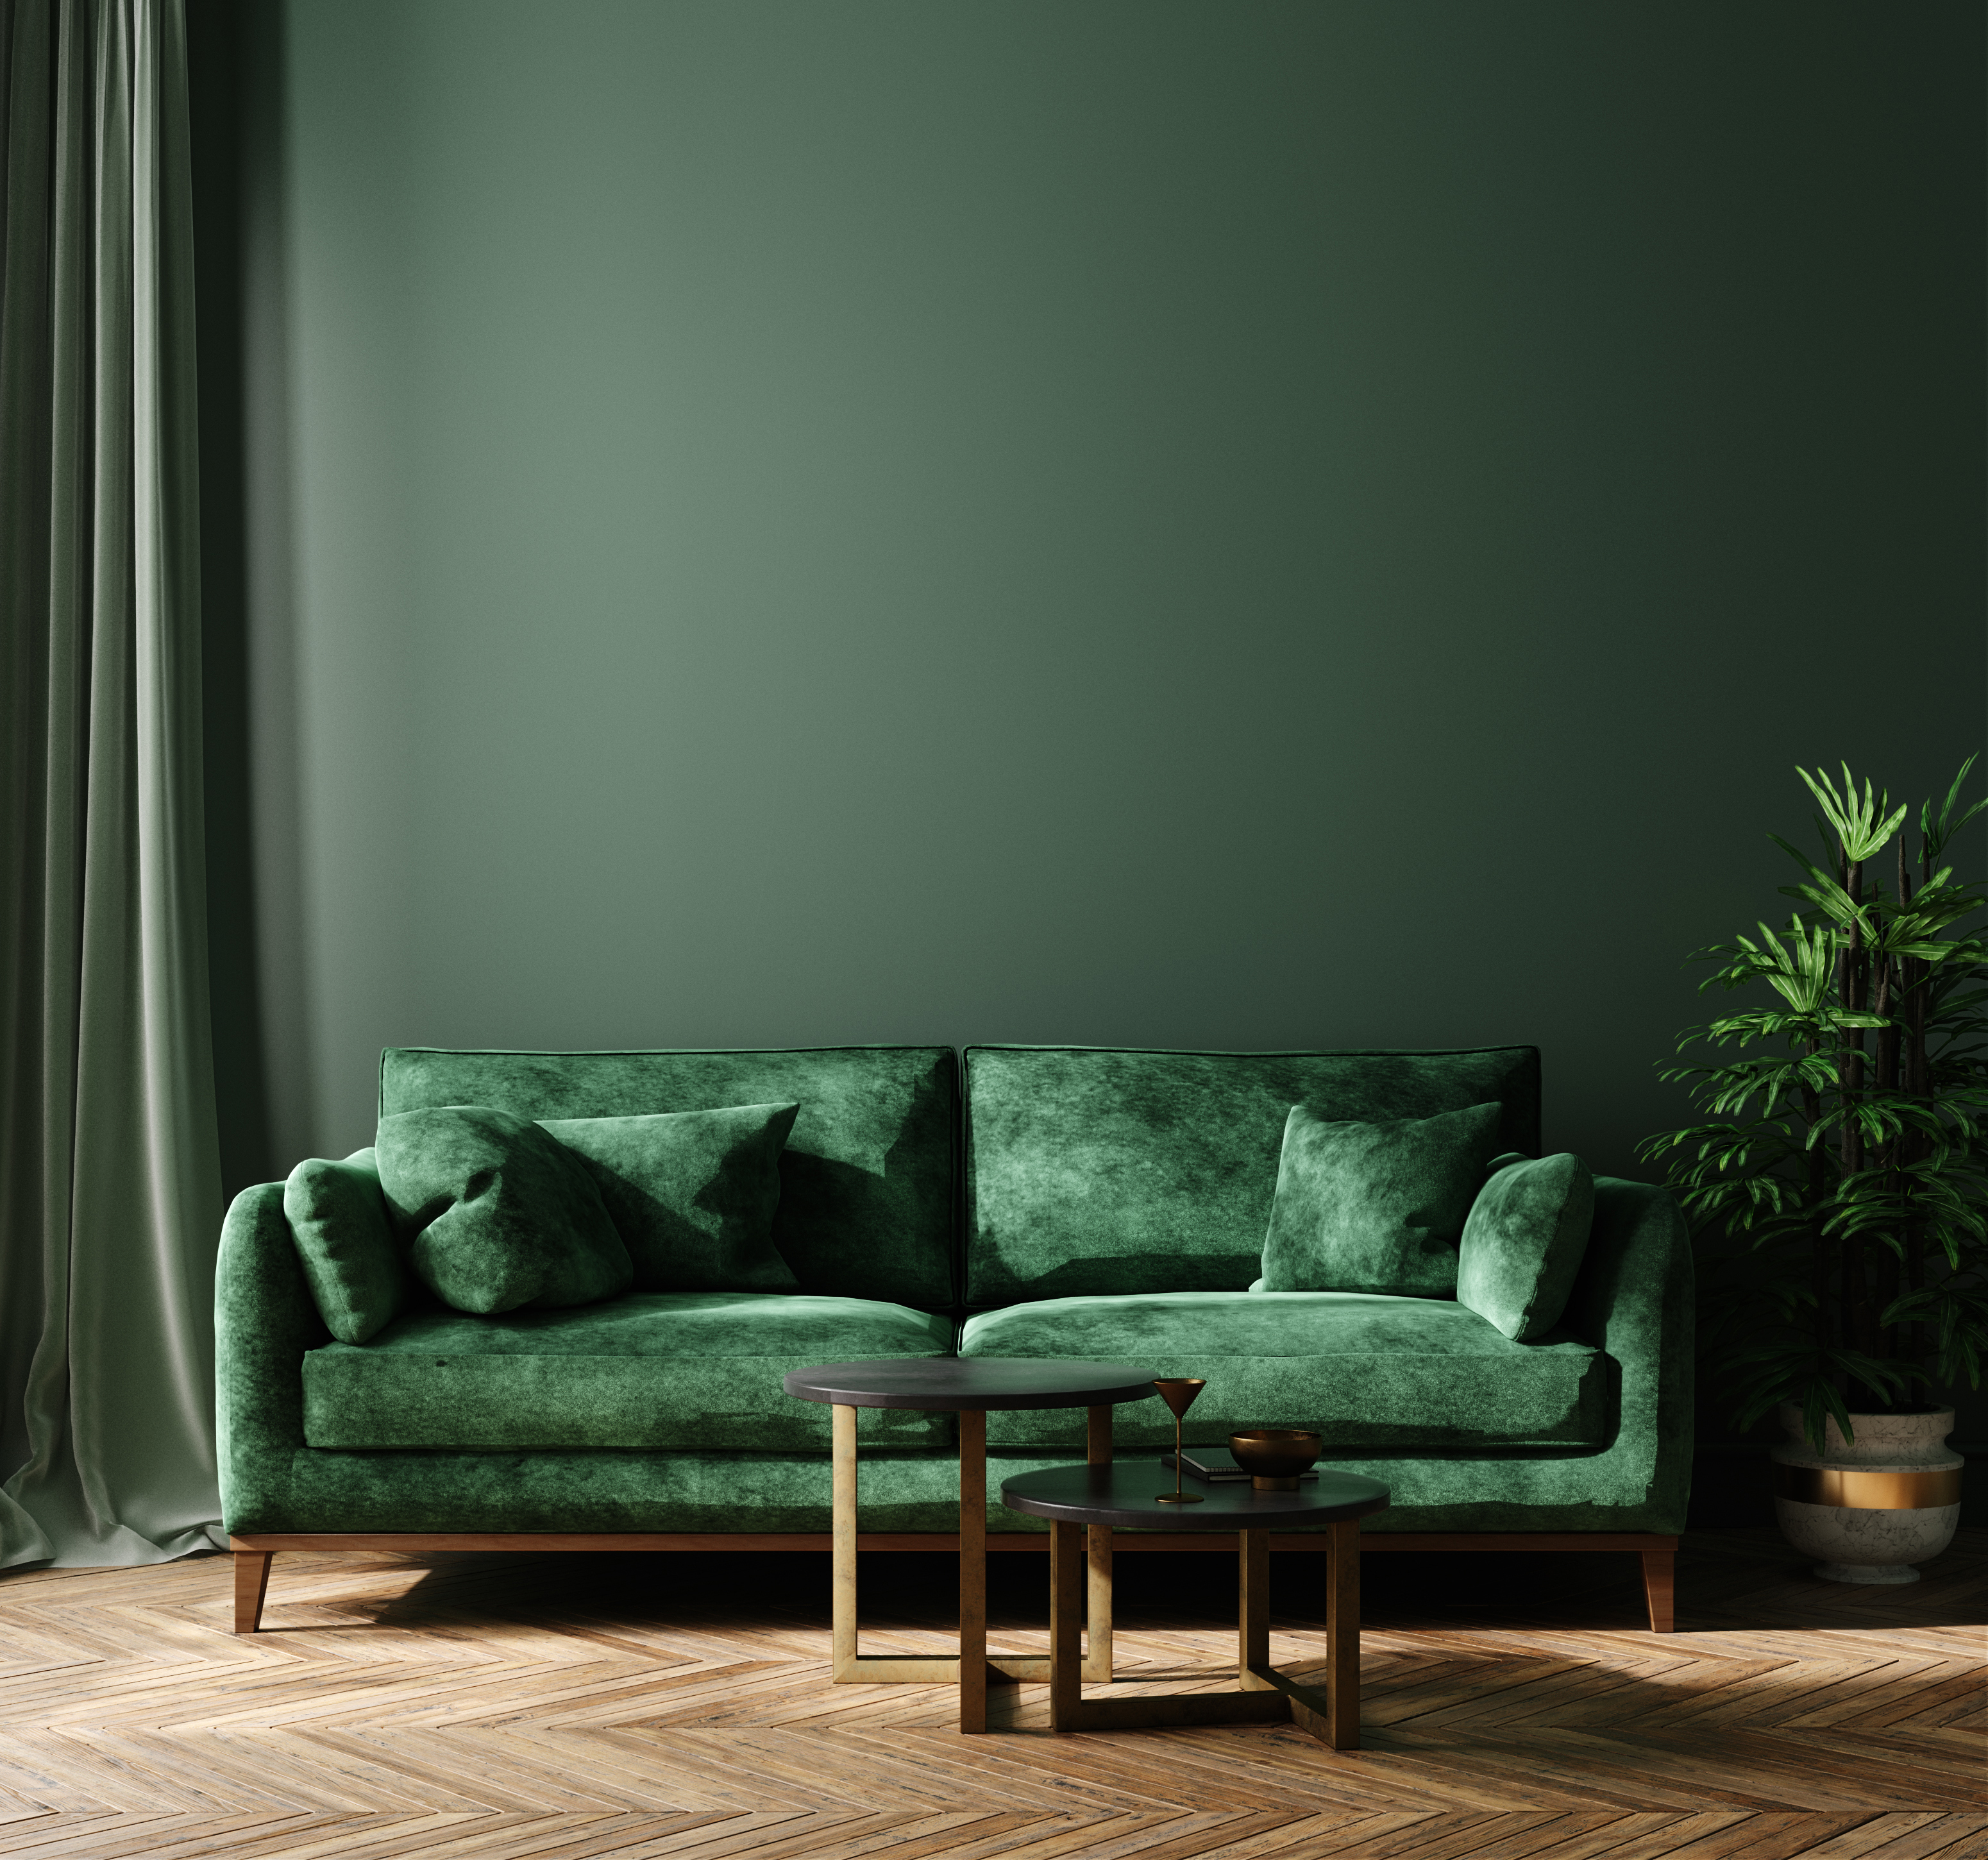 green velvet sofa in front of forest green wall